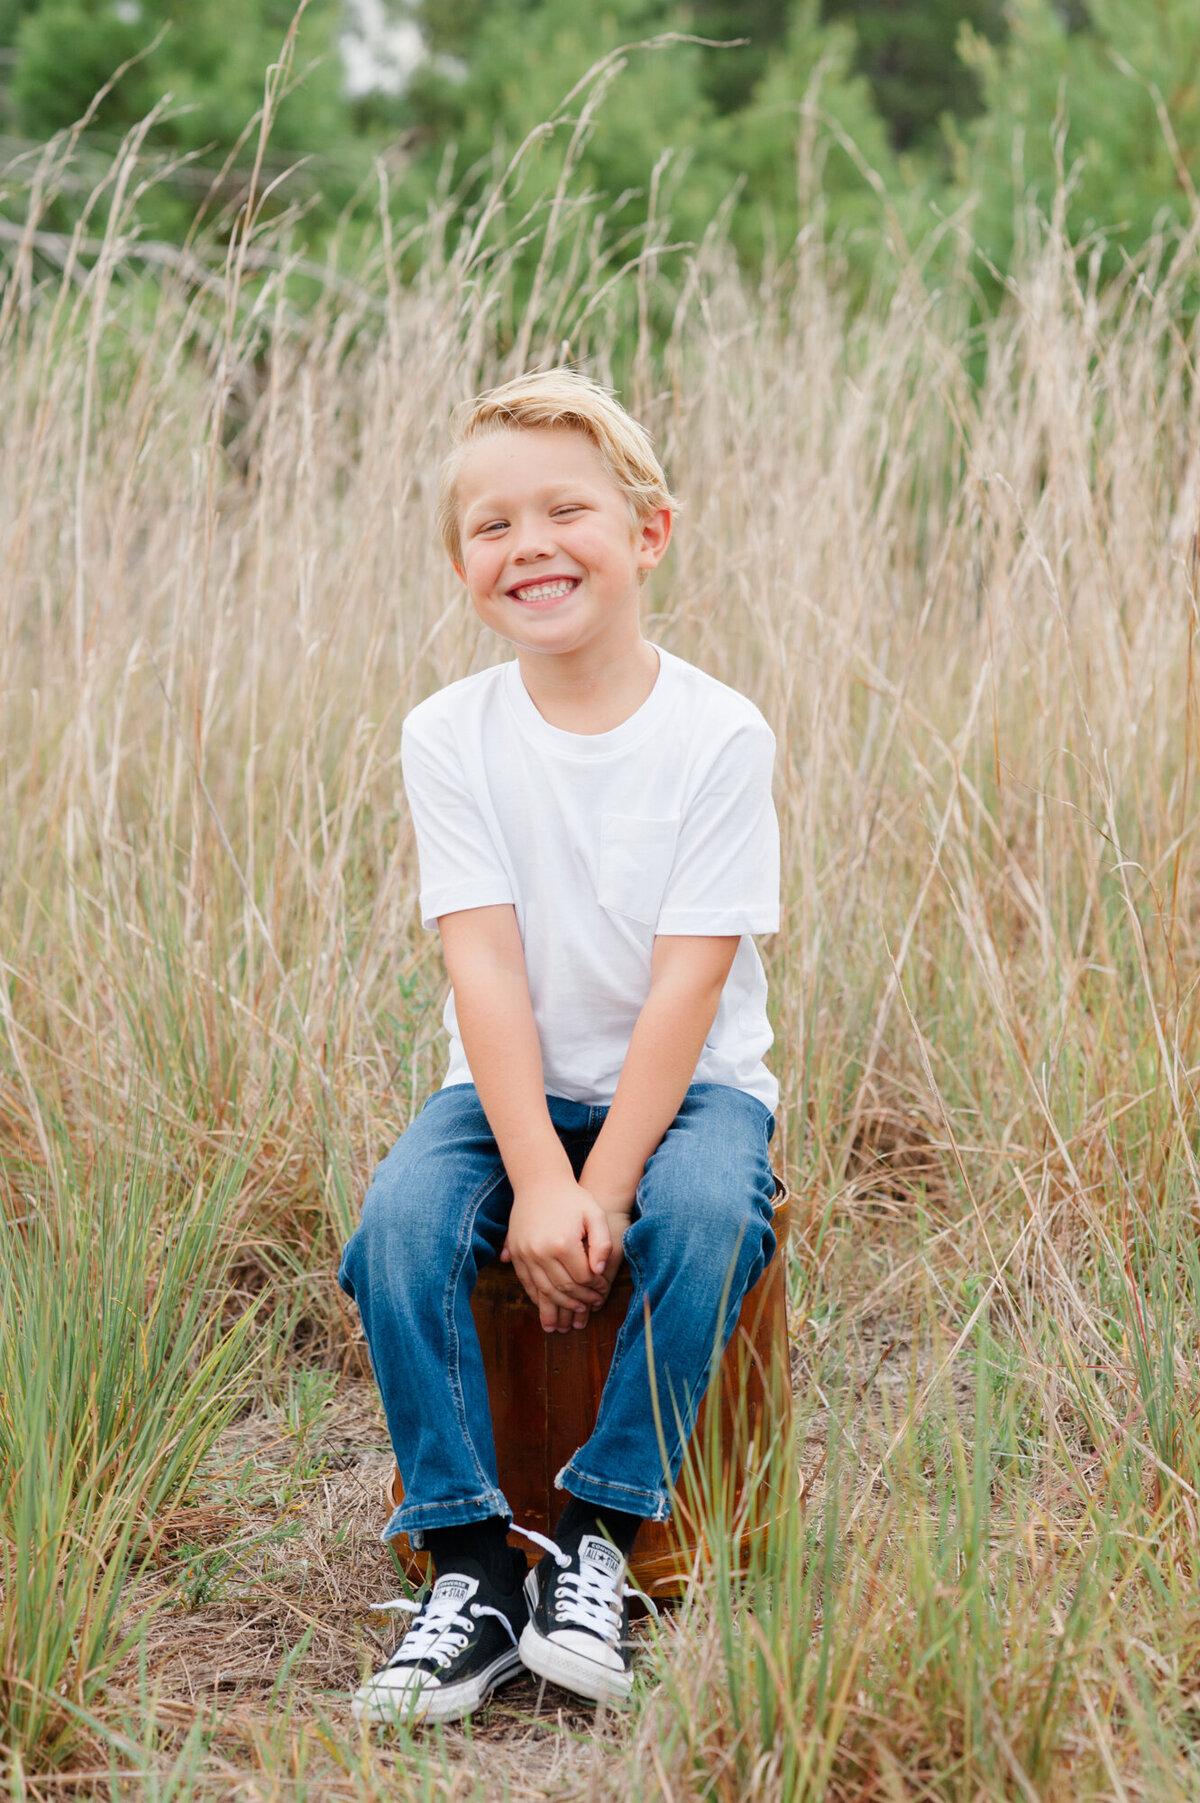 Young blonde boy sitting on a bucket and smiling at the camera